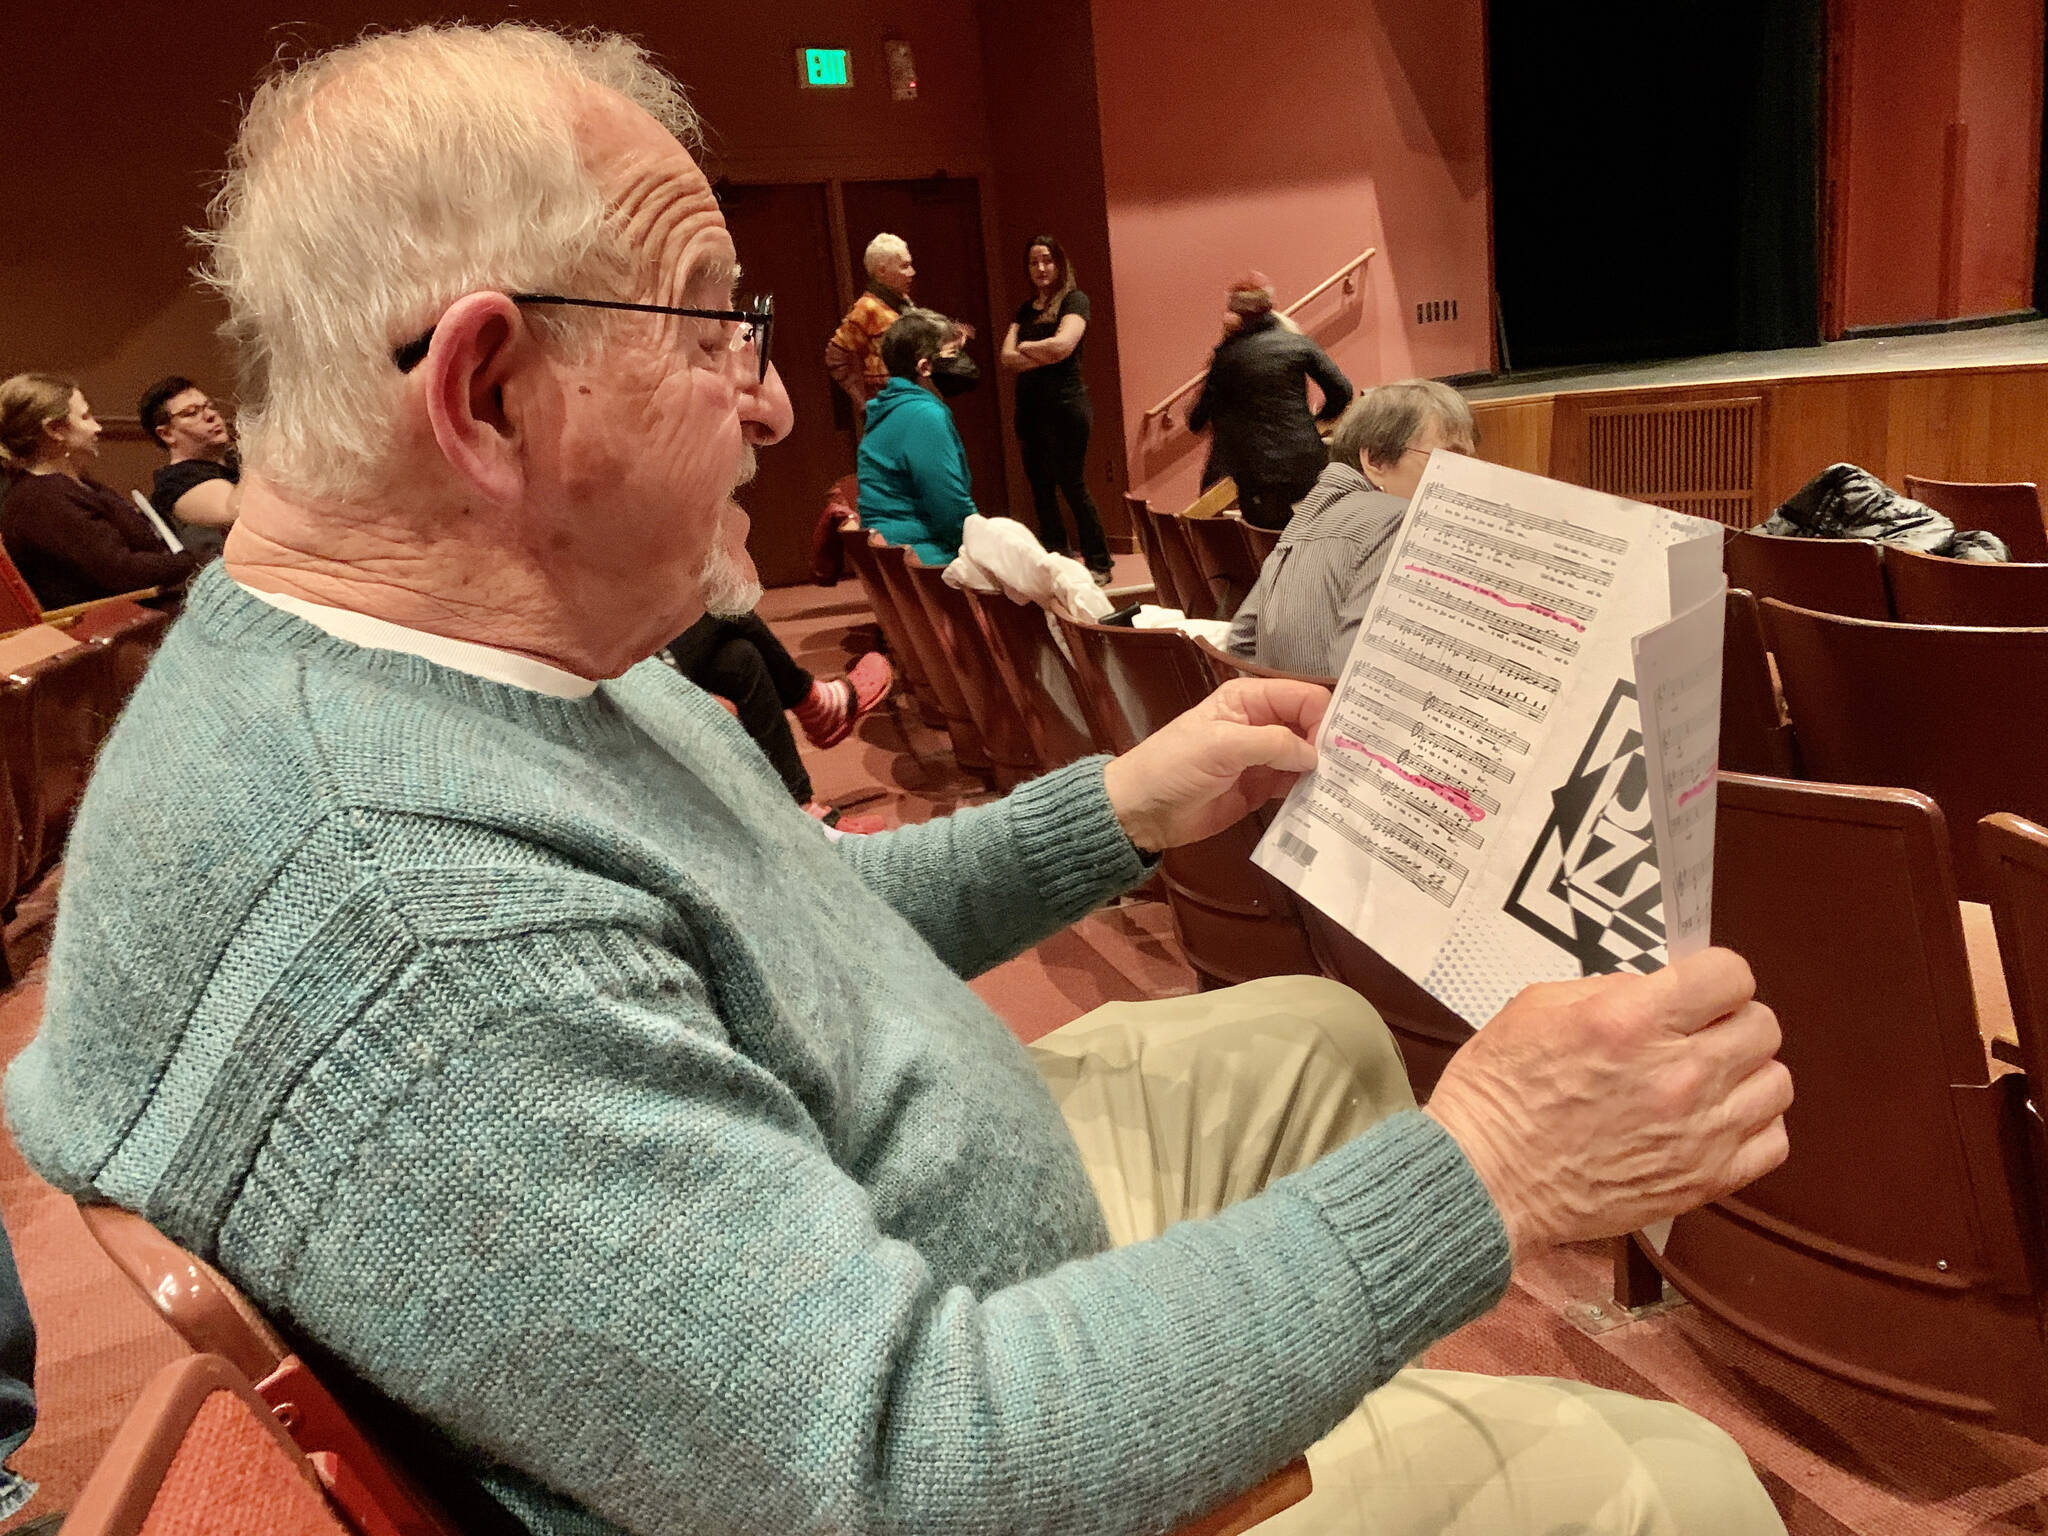 Photo by Christina Whiting/Homer News
Community member Roy Wilson reads music during Feb. 21 community chorus at the Mariner Theatre.